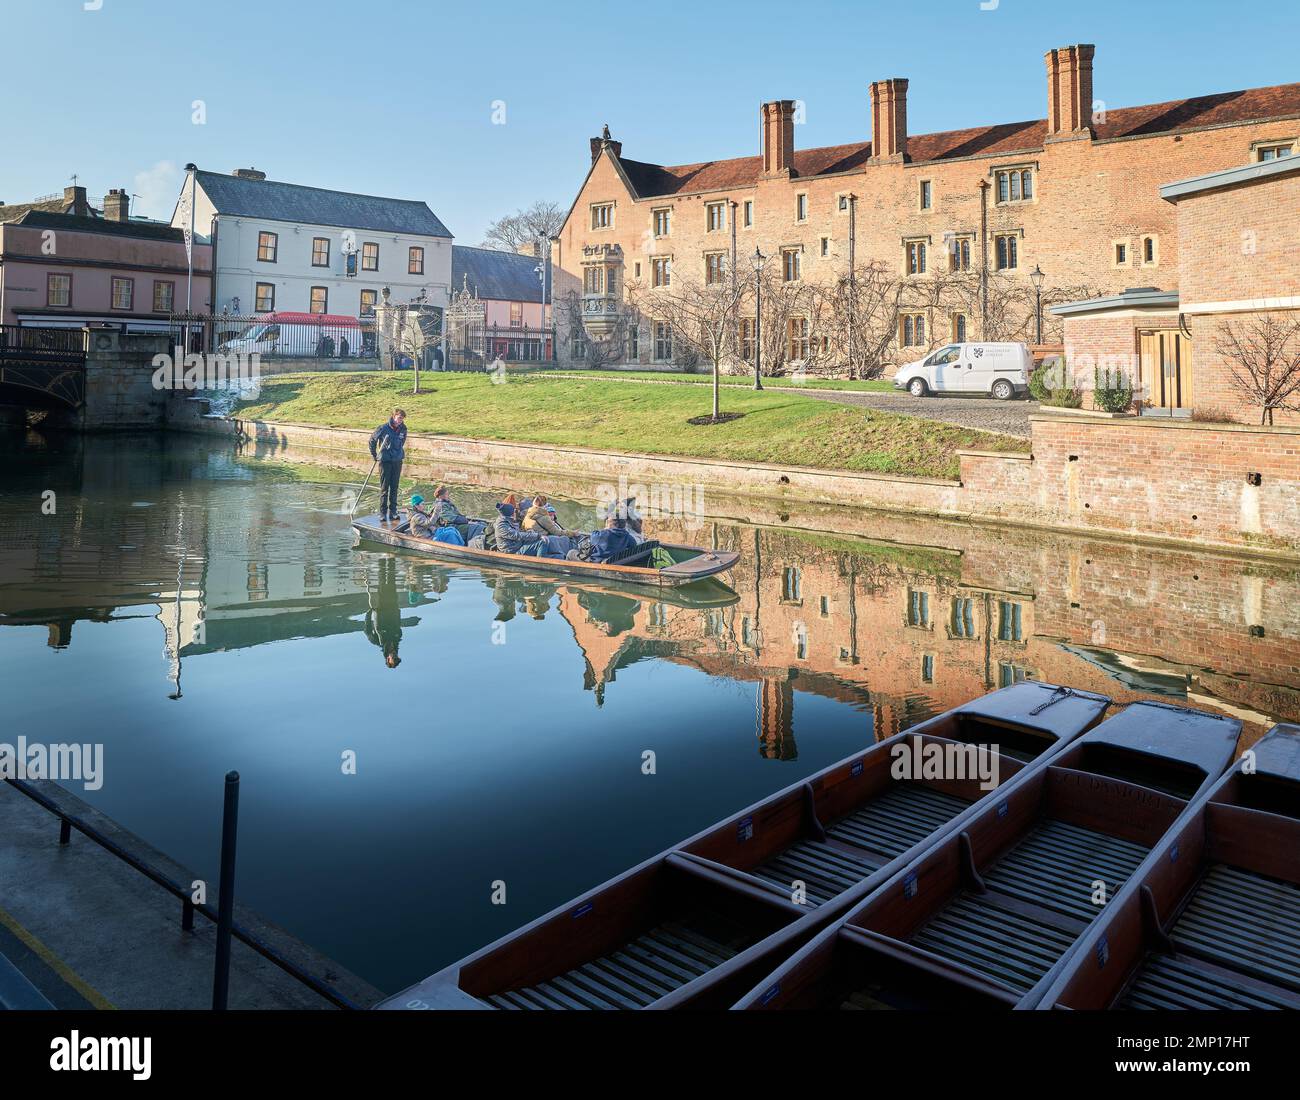 A punt load of tourists reflected in the river Cam by Magdalene college, University of Cambridge, England. Stock Photo